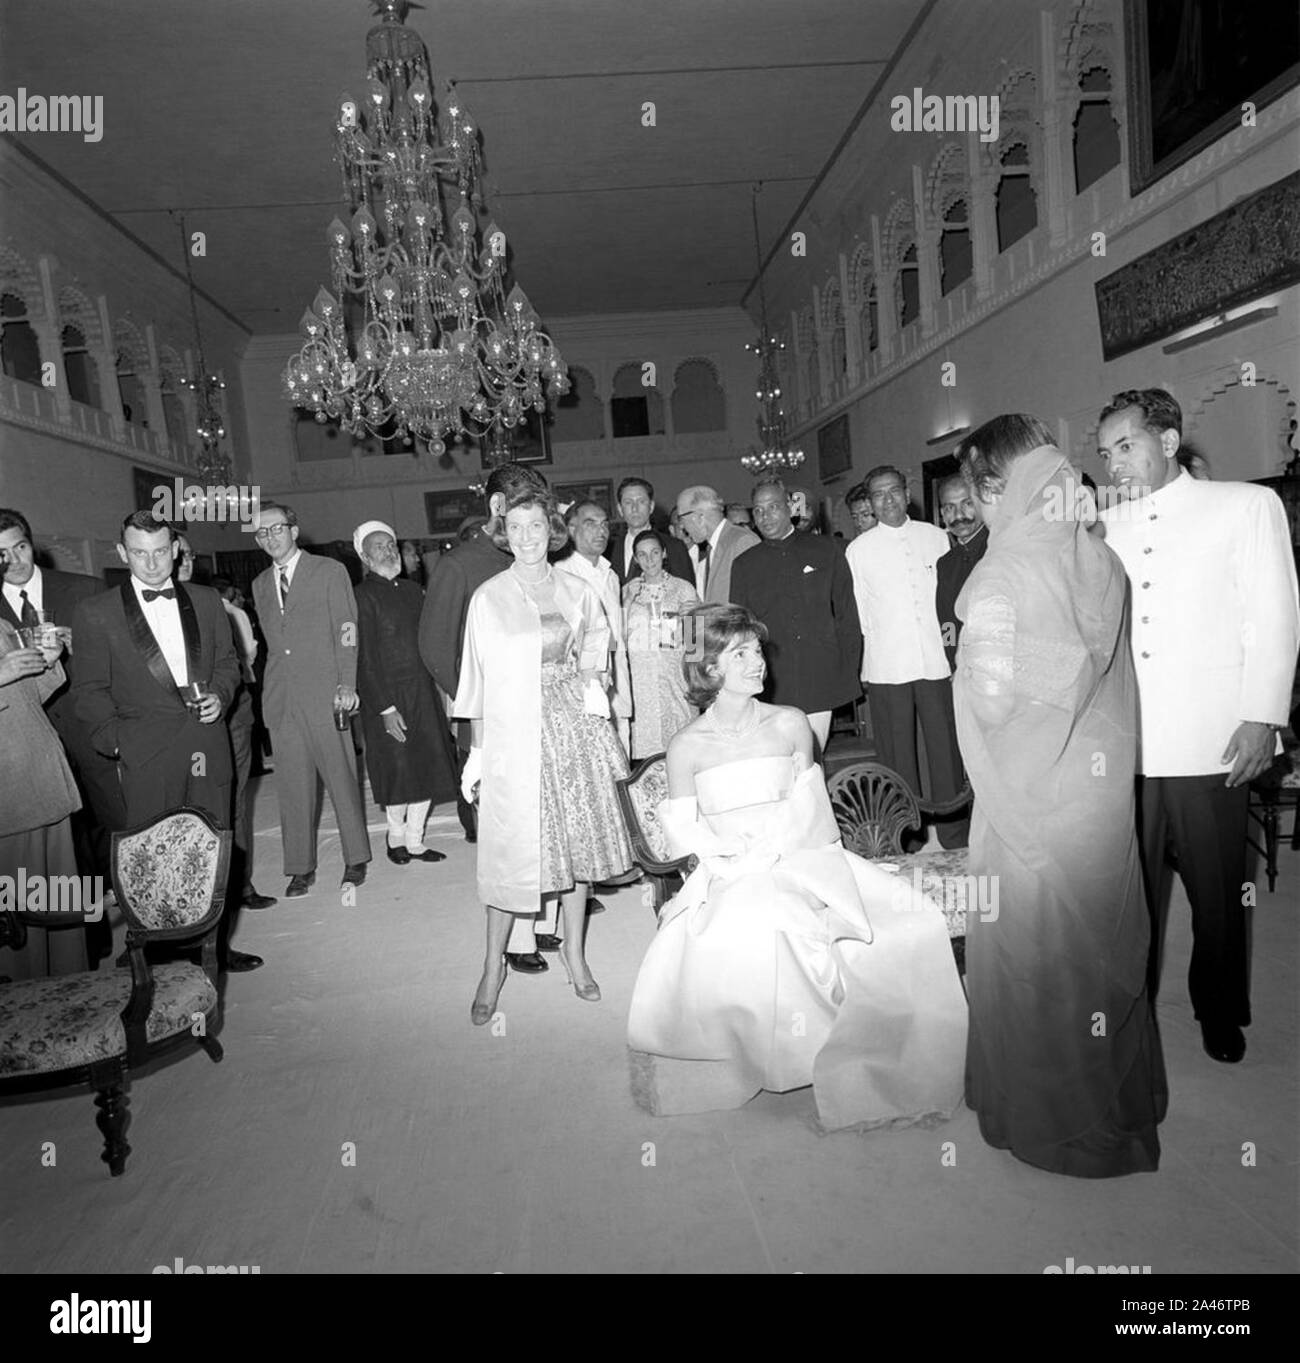 First Lady Jacqueline Kennedy besucht Empfang in Udaipur, Indien (3). Stockfoto